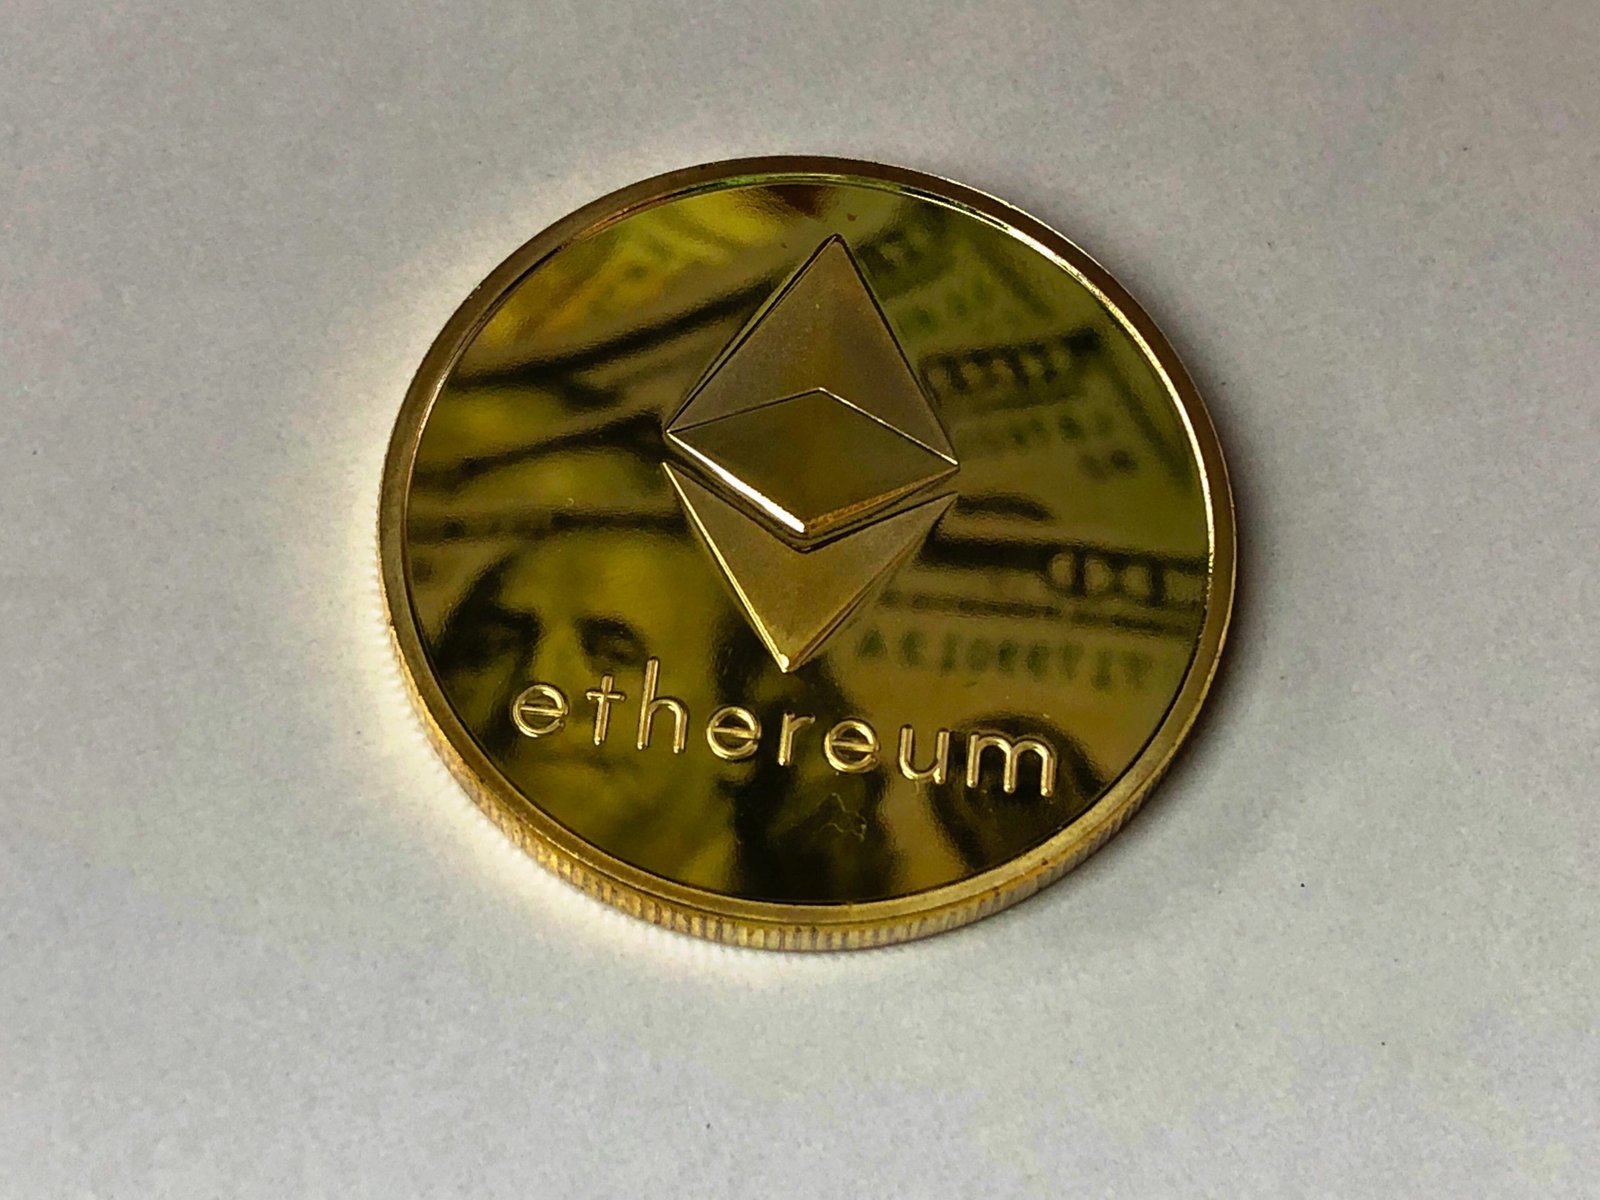 Price Increases 40% Due to Merge Hype for Ethereum. What Will Happen Next, Say Experts